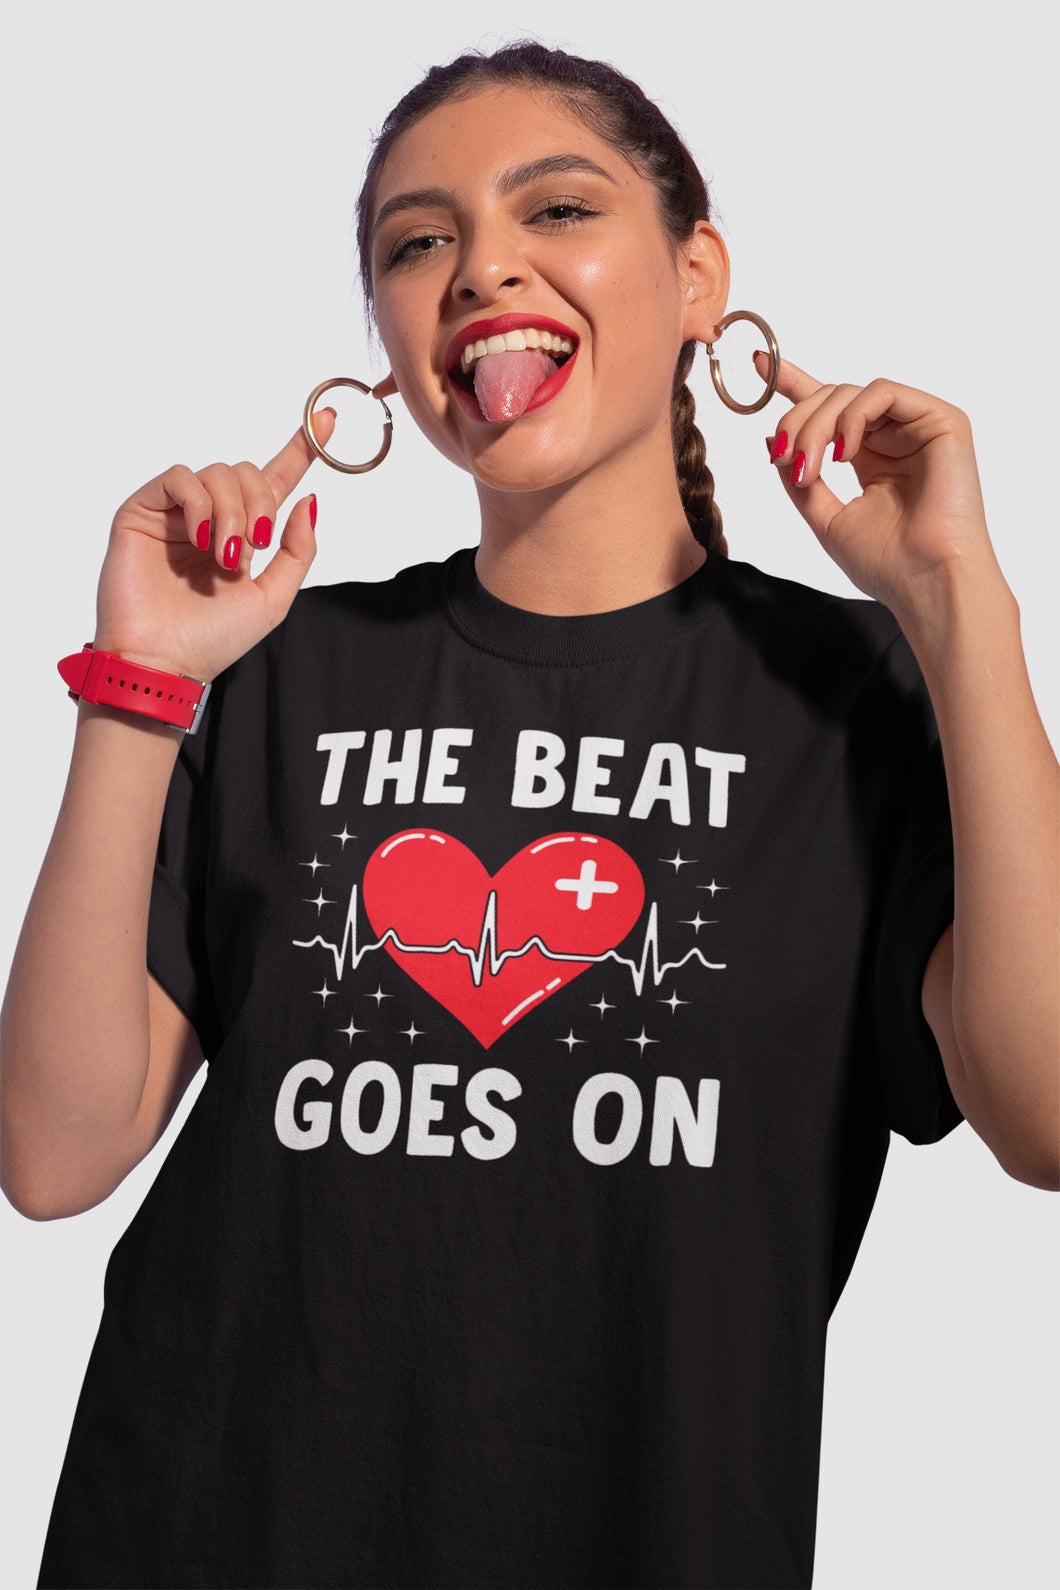 The Beat Goes On Shirt, Open Heart Surgery Shirt, Heartbeats Shirt, Heart Surgery Shirt